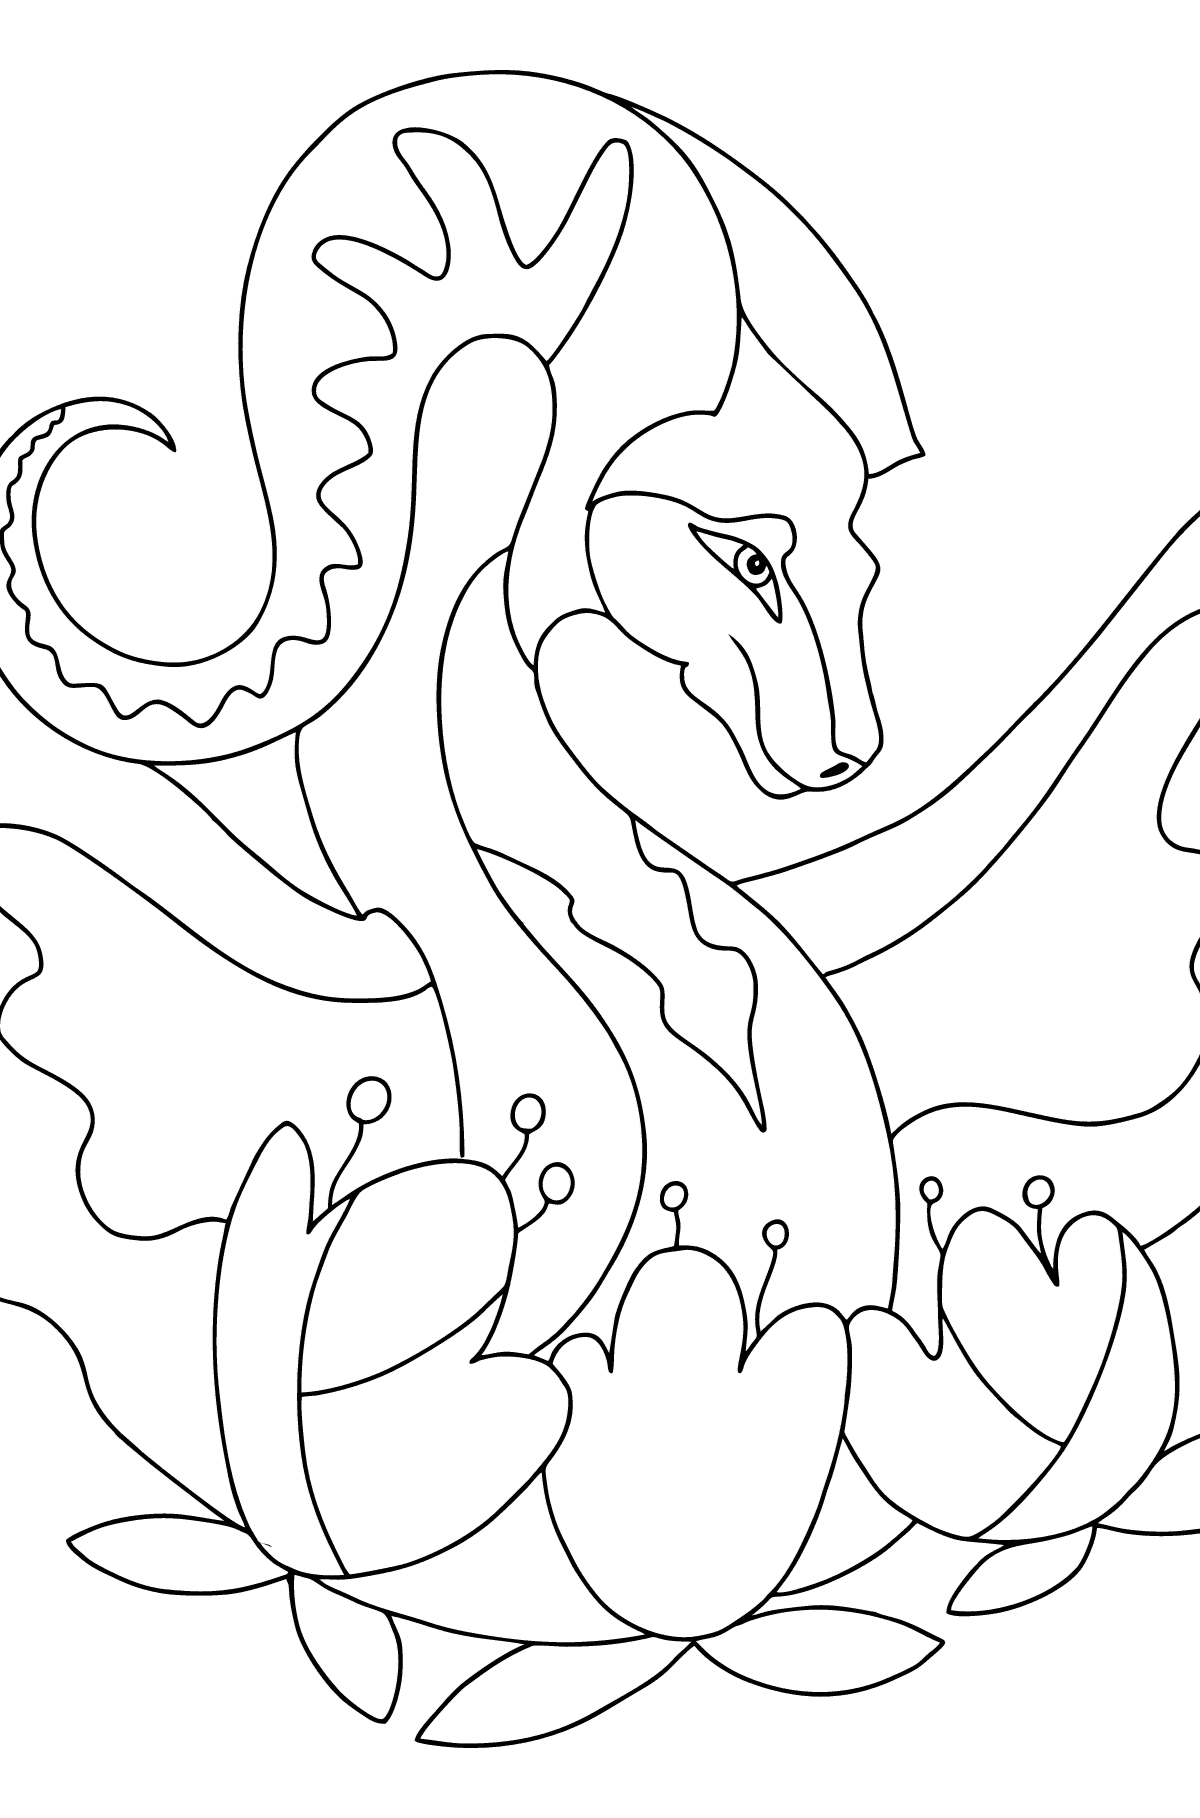 Rainbow Dragon Coloring Page (difficult) - Coloring Pages for Kids